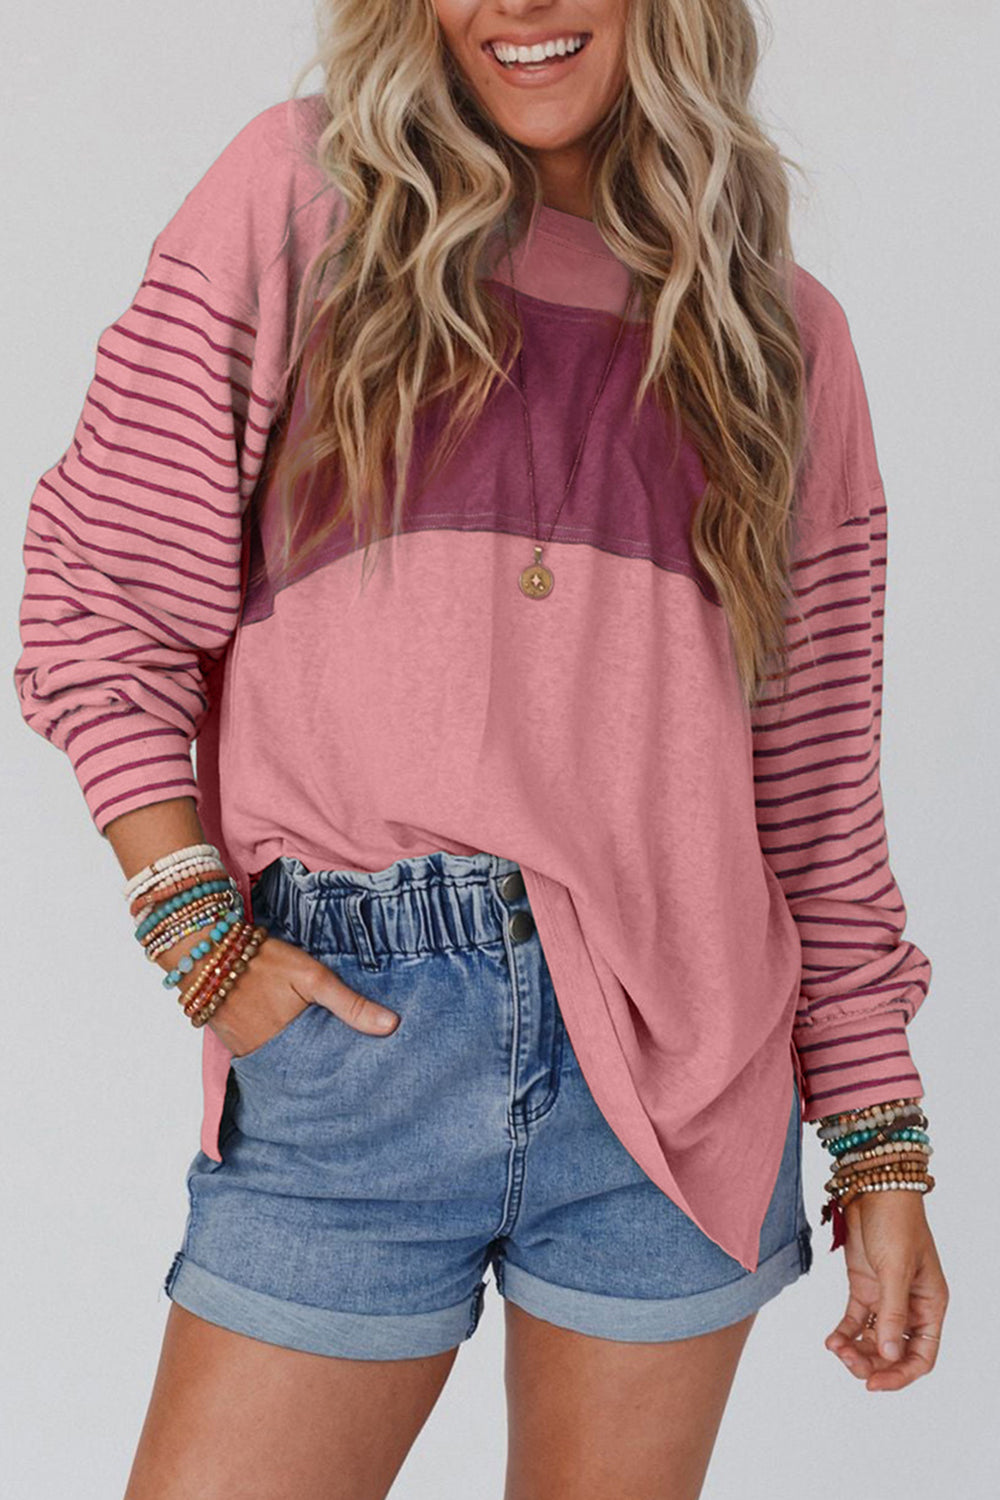 Striped Round Neck Long Sleeve T-Shirt (4 Colors)  Krazy Heart Designs Boutique   